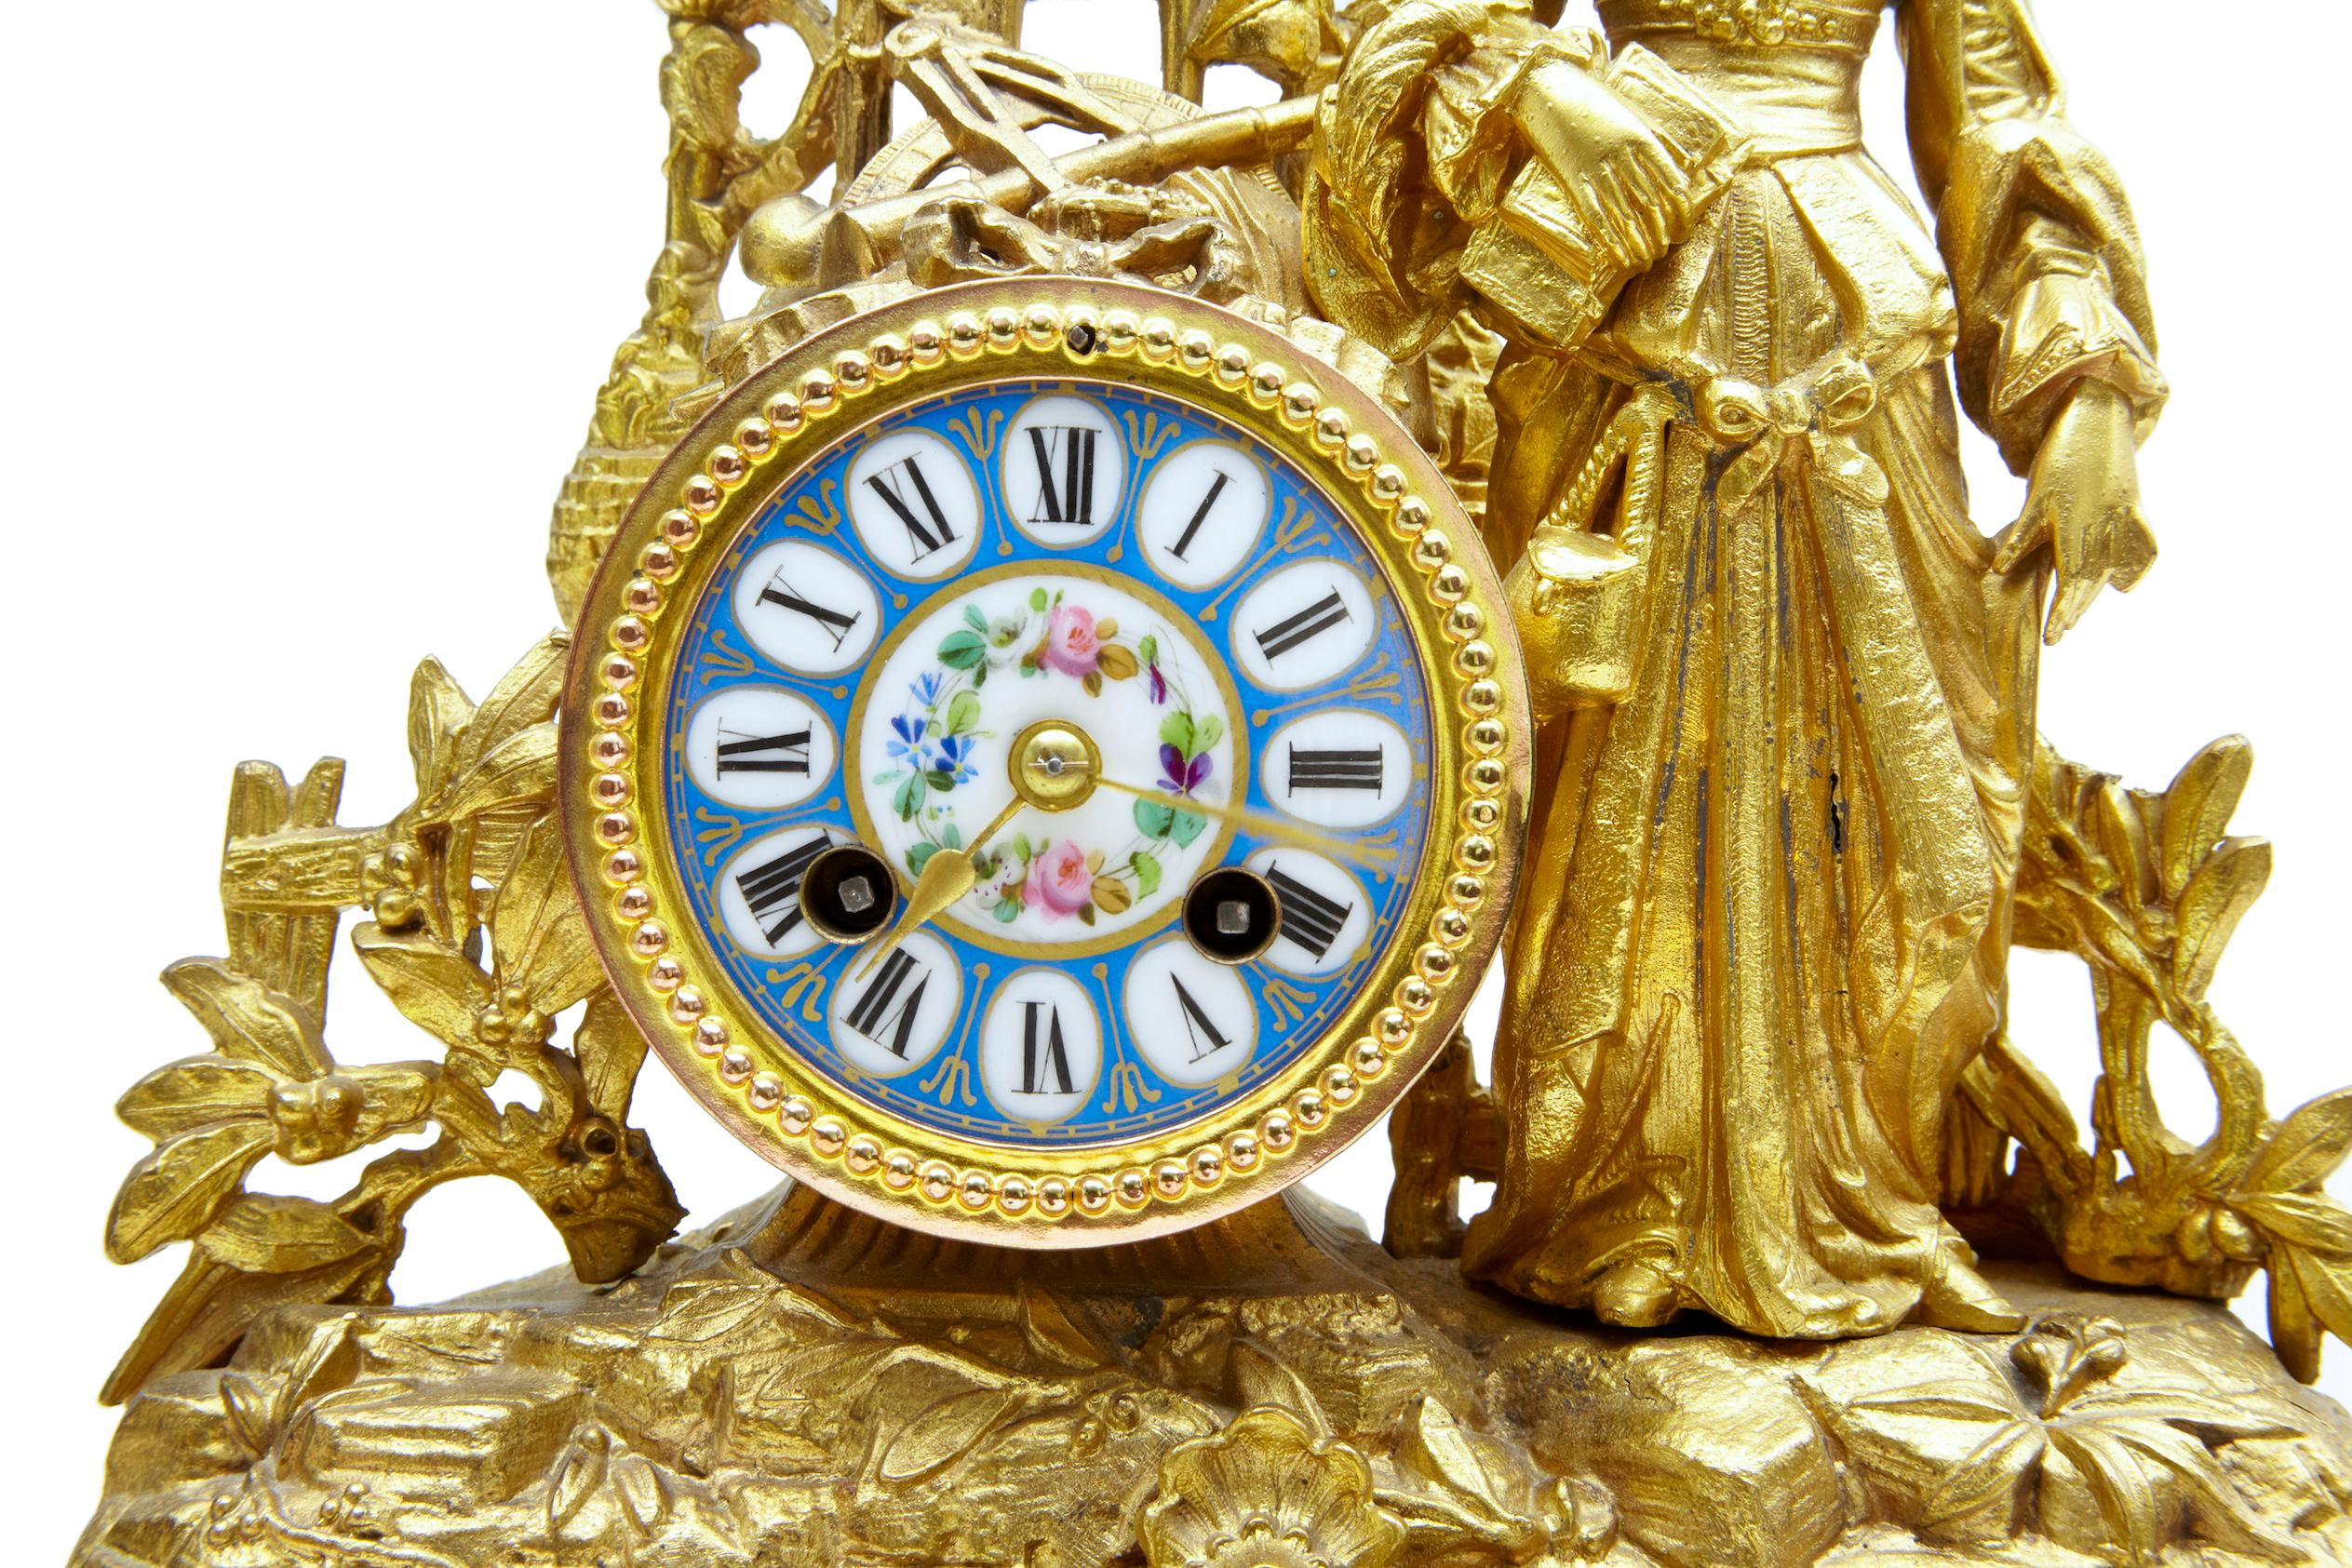 19th Century French Gilt Mantel Clock with Sèvres Plaques 1